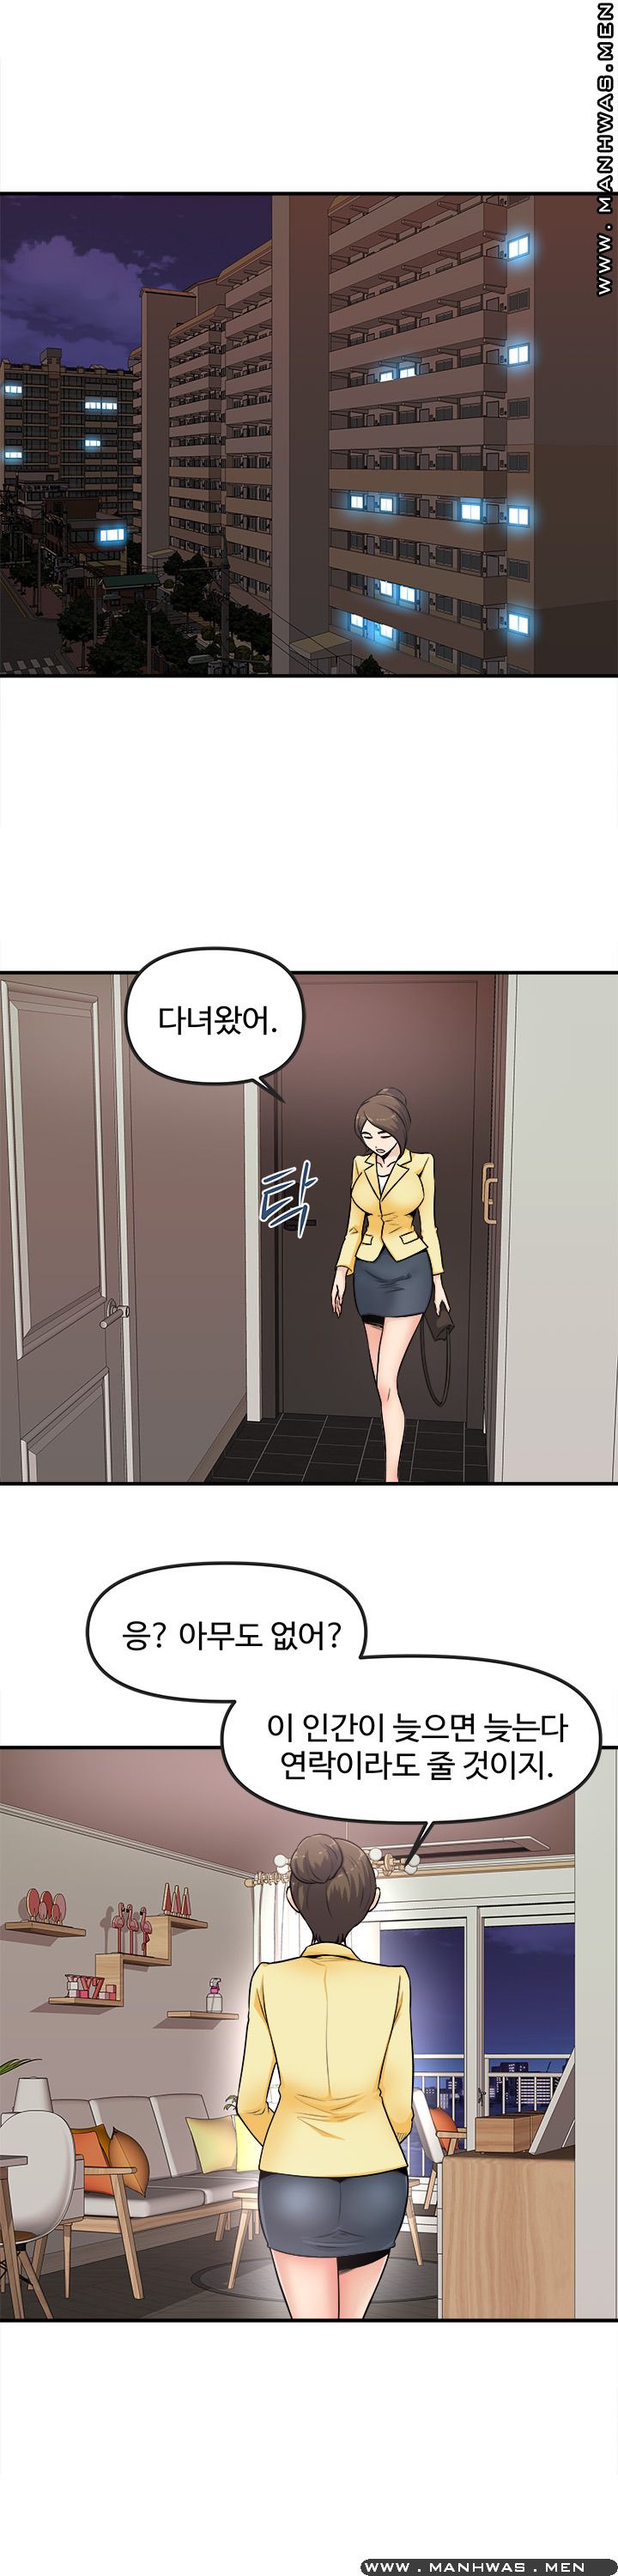 Office Bible Raw - Chapter 2 Page 21